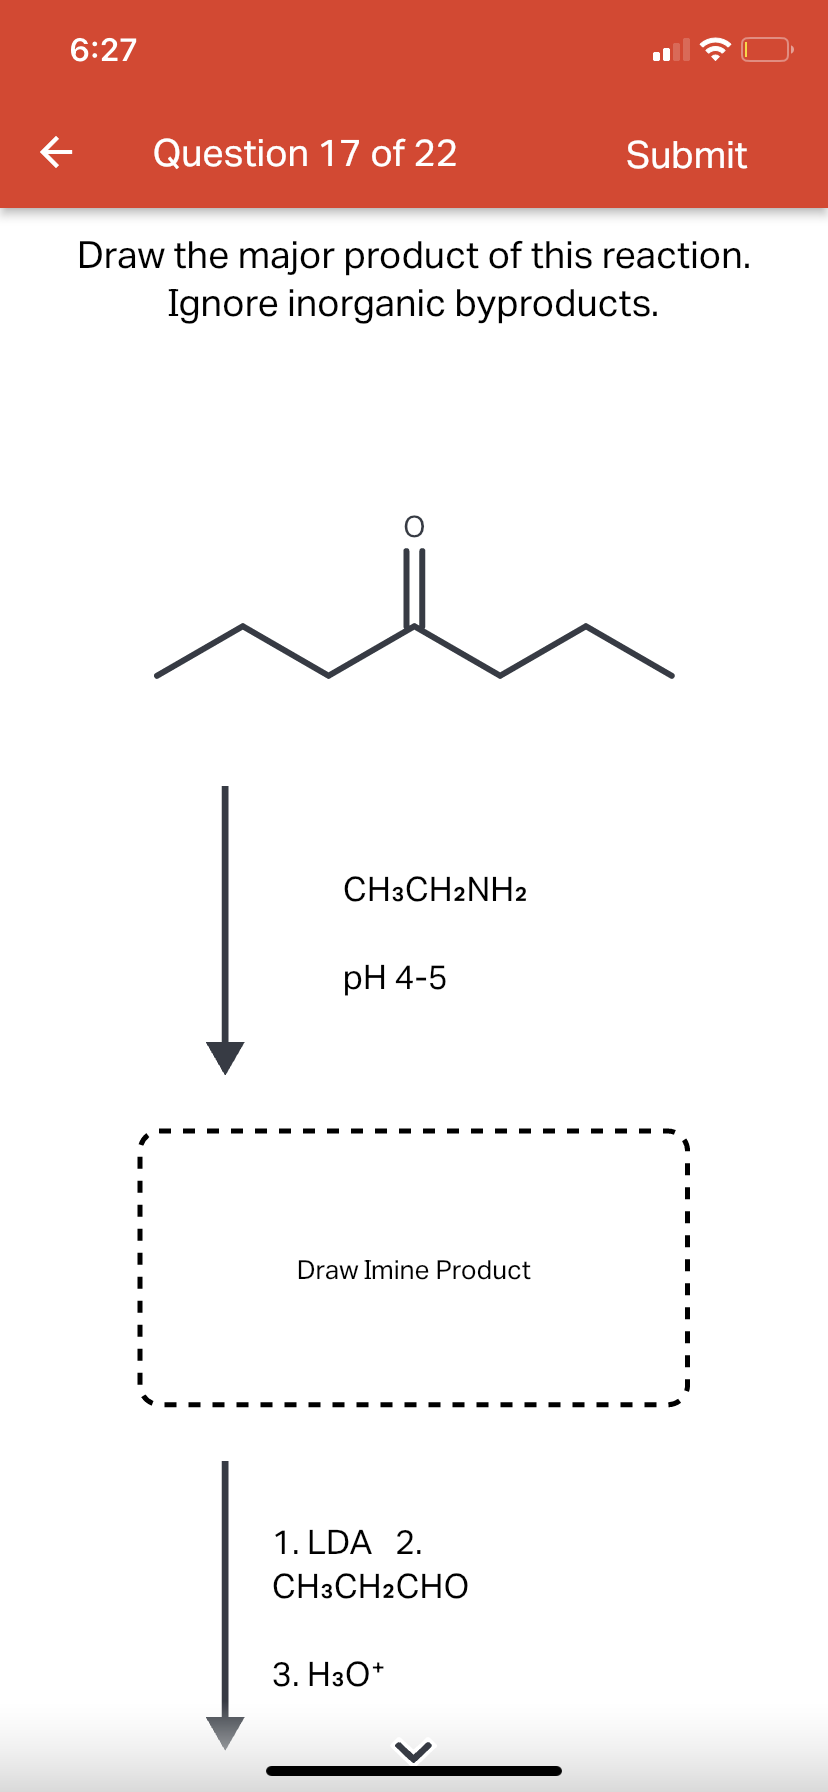 6:27
←
Question 17 of 22
Draw the major product of this reaction.
Ignore inorganic byproducts.
CH3CH2NH2
pH 4-5
Draw Imine Product
1. LDA 2.
CH3CH2CHO
Submit
3. H3O+